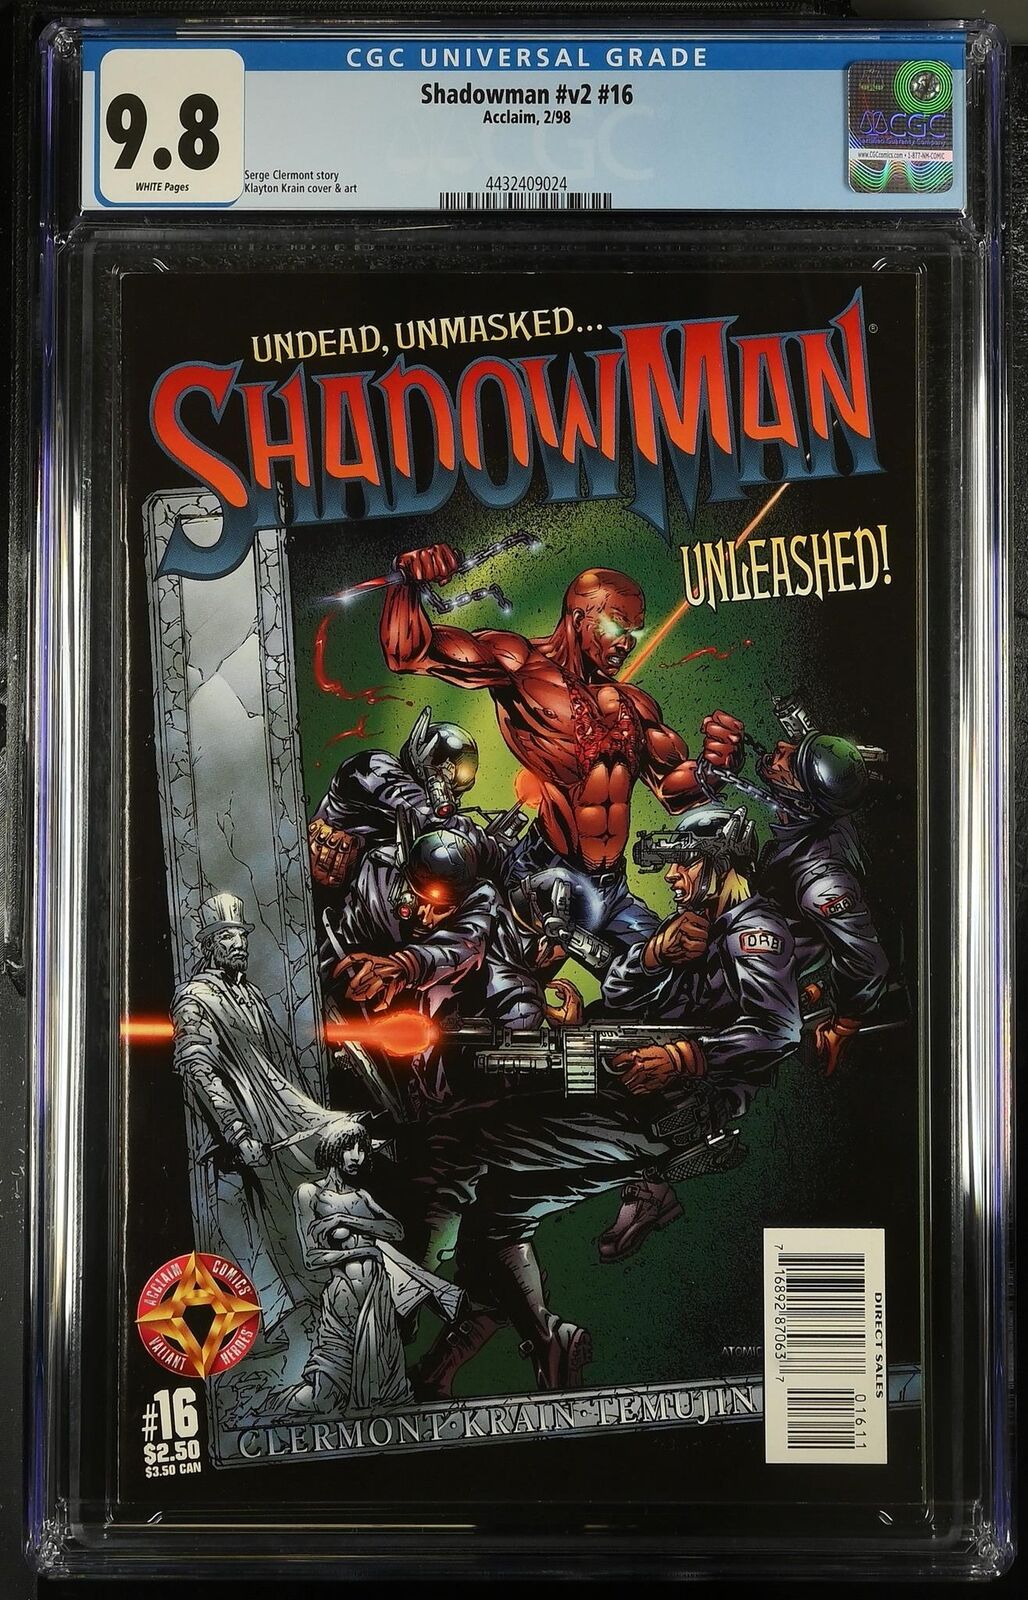 Shadowman v2 16 CGC 9.8 1998 4432409024 Undead, Unmasked... Unleashed Scarce